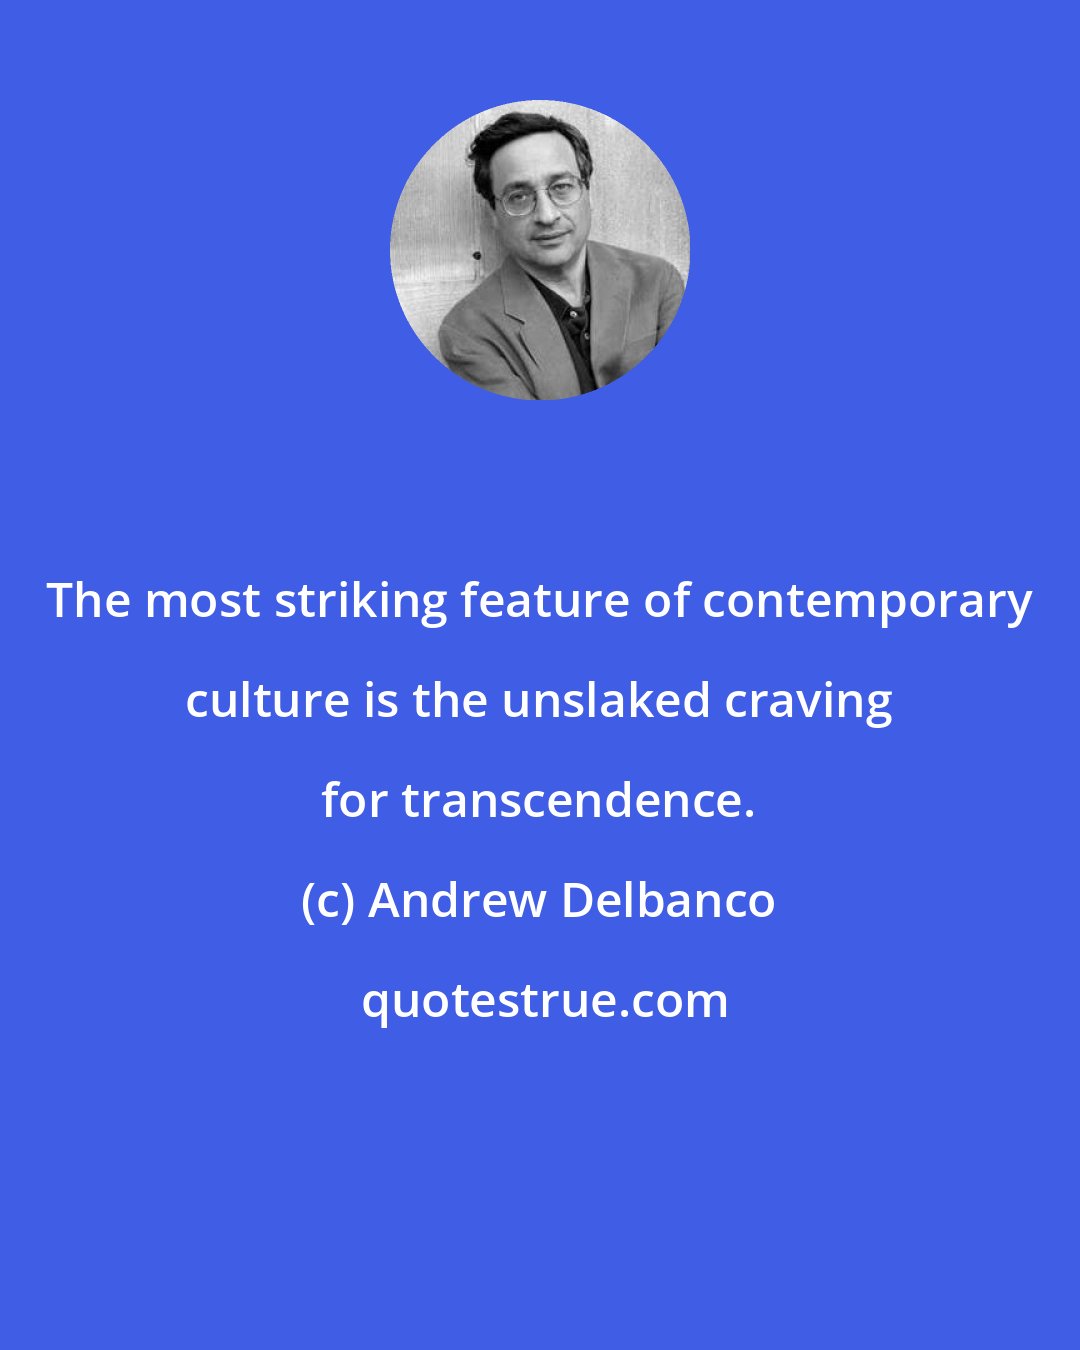 Andrew Delbanco: The most striking feature of contemporary culture is the unslaked craving for transcendence.